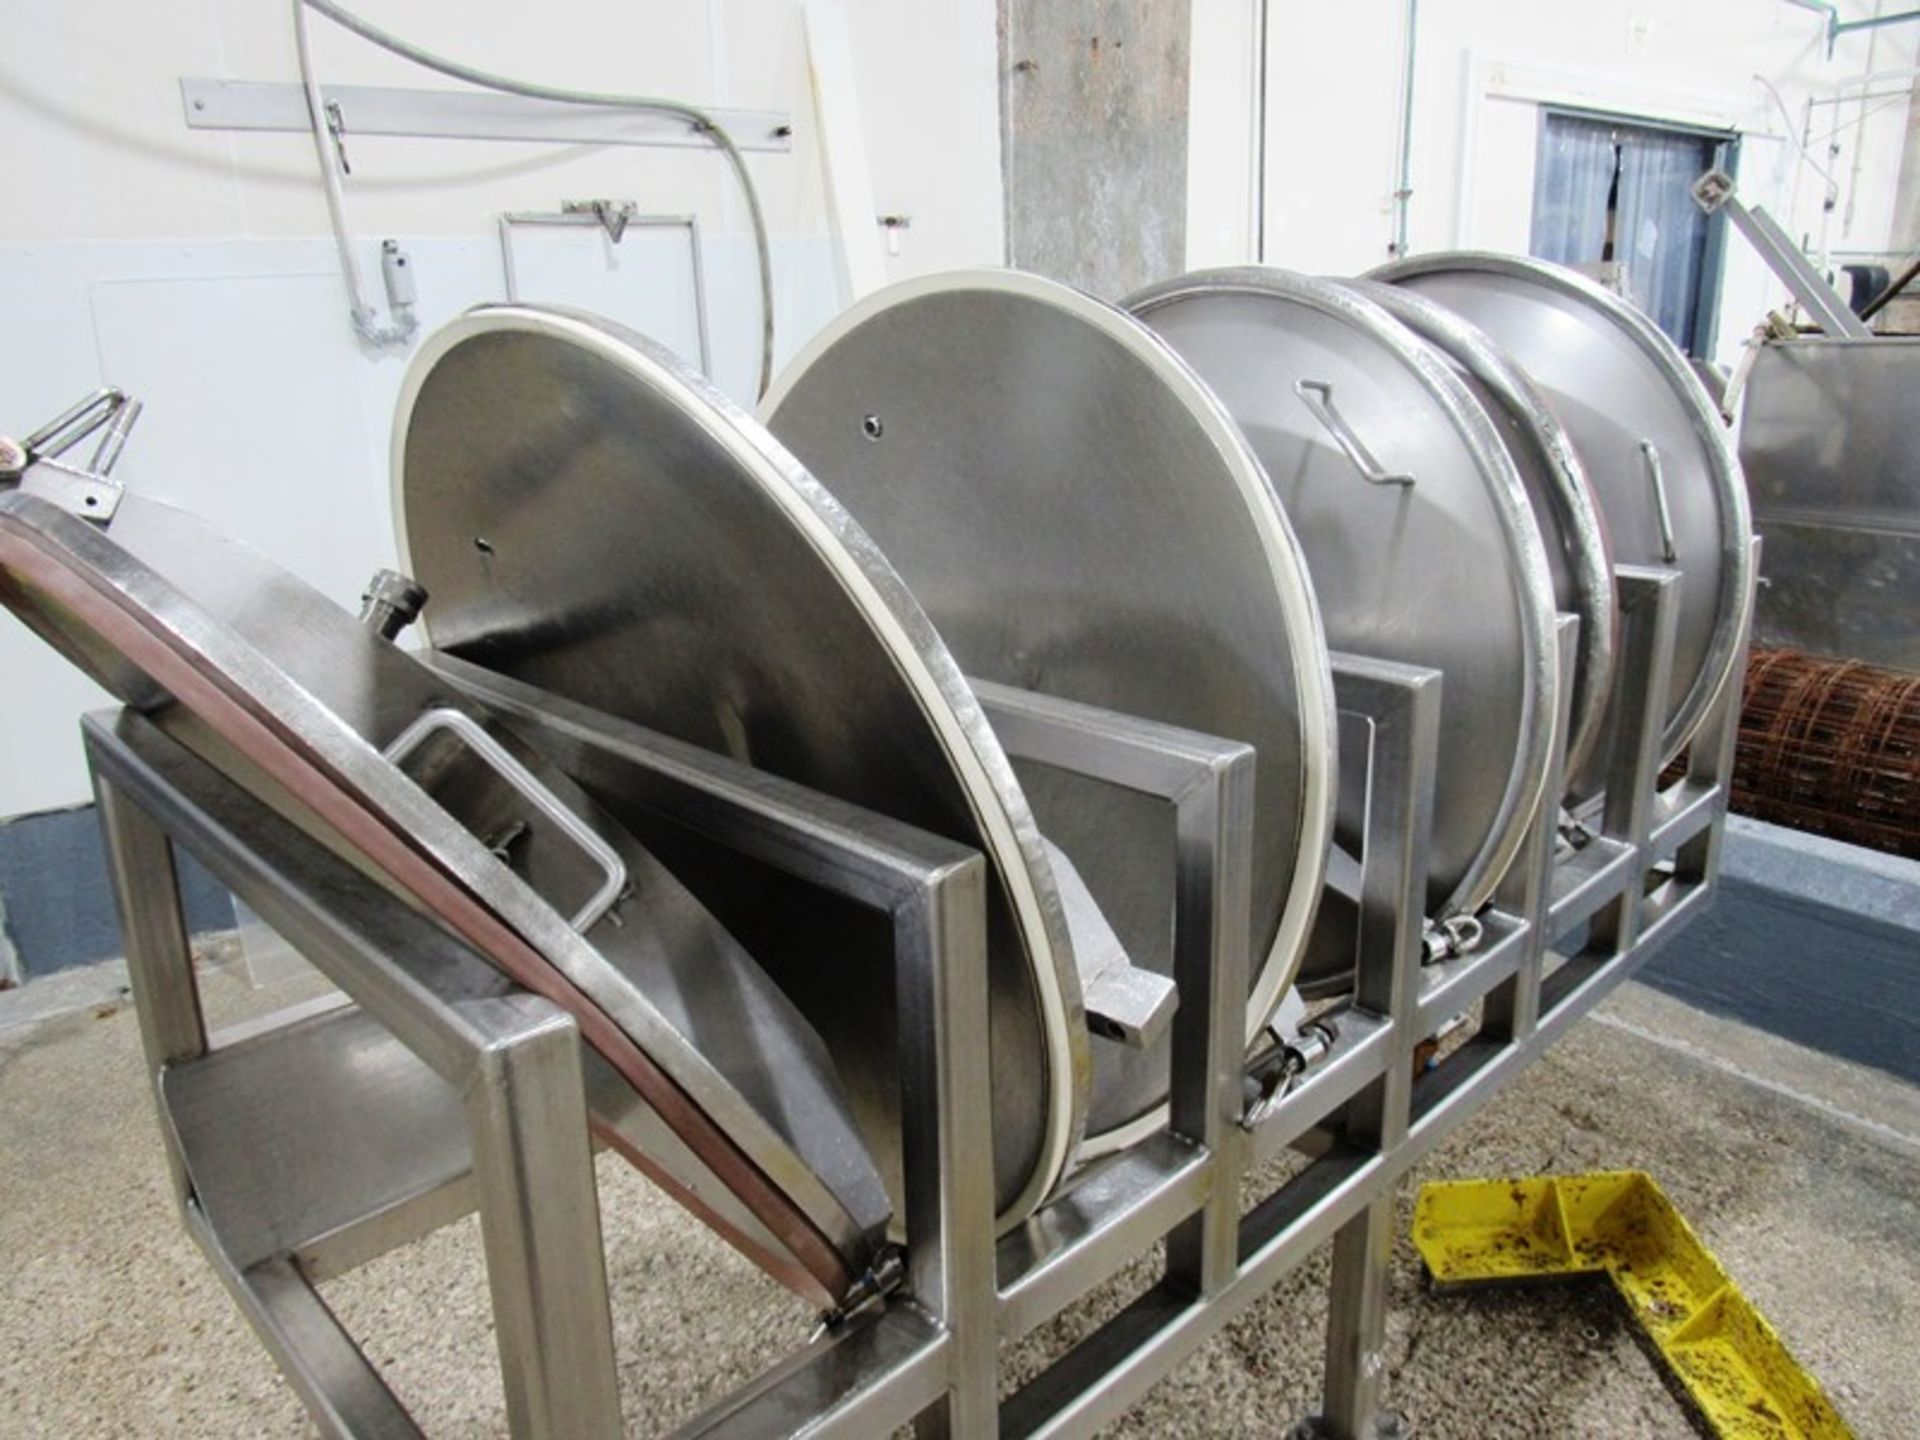 Globus Mdl. HS 3/5 Tumbling System, tumbling bed, (1) 750 liter stainless steel drum with lid, - Image 6 of 6